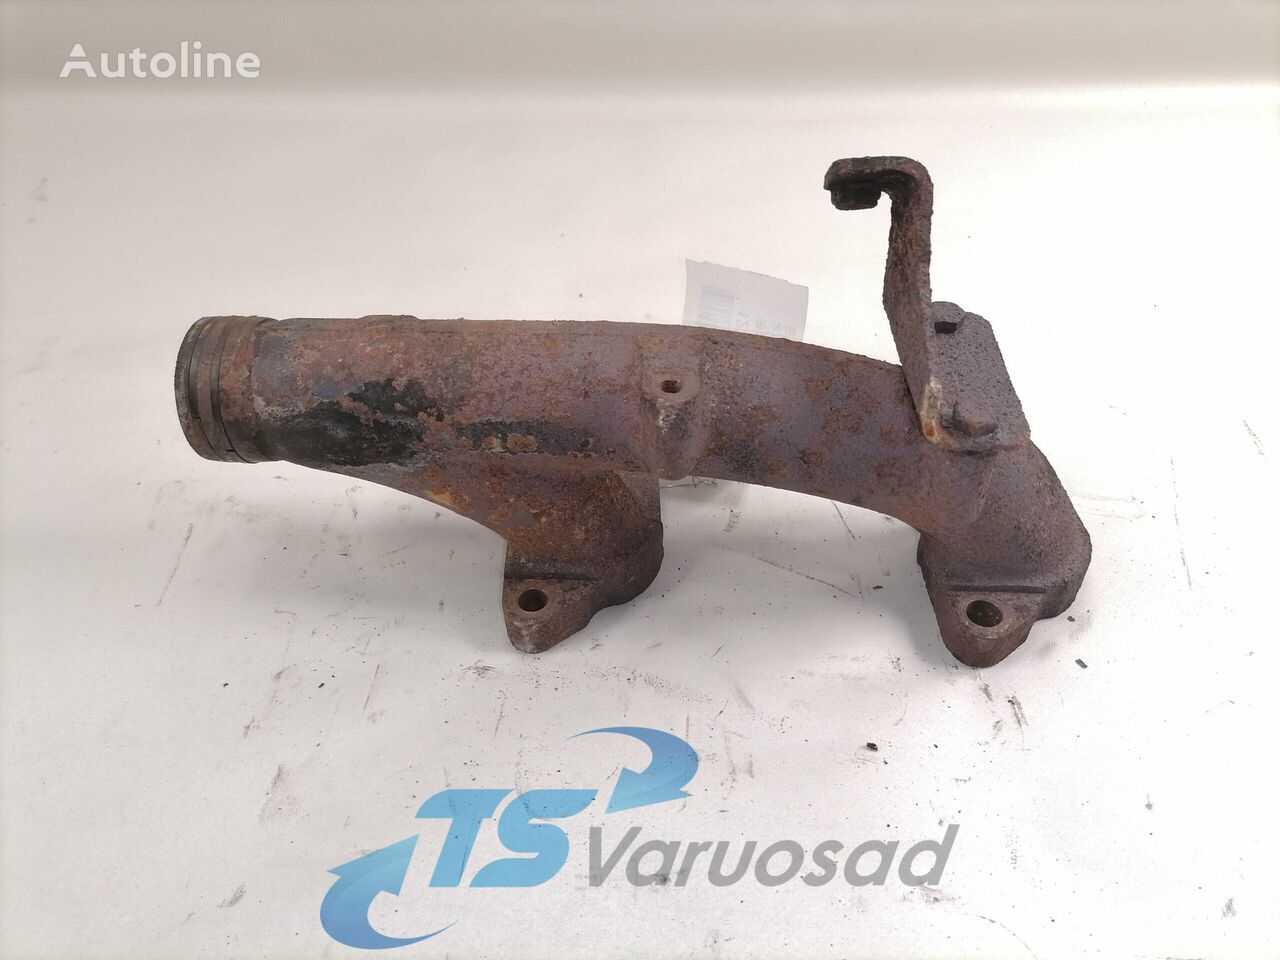 Scania Exhaust mainfold 1863895, 1945331 manifold for Scania R420 truck tractor